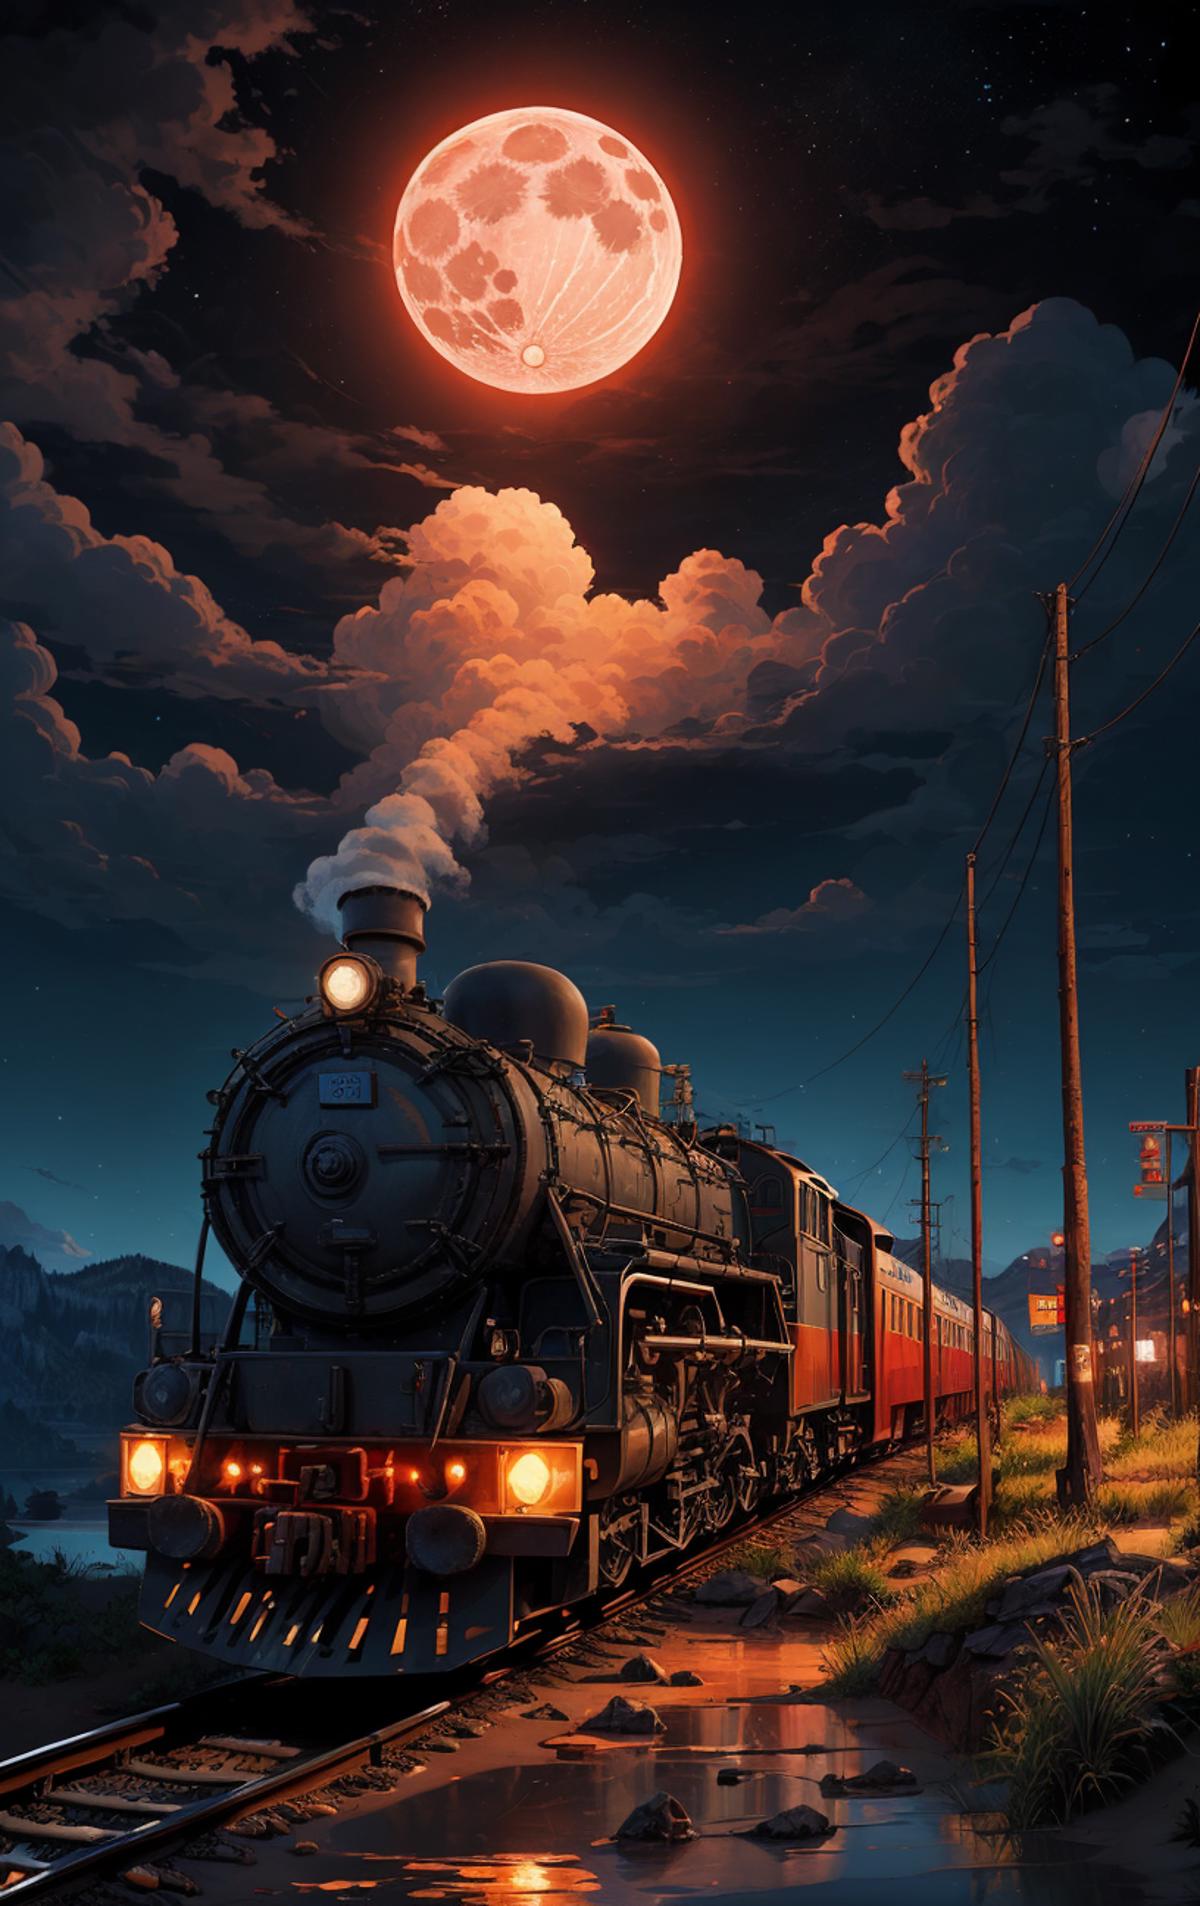 A black and red train on the tracks at night with a full moon in the background.